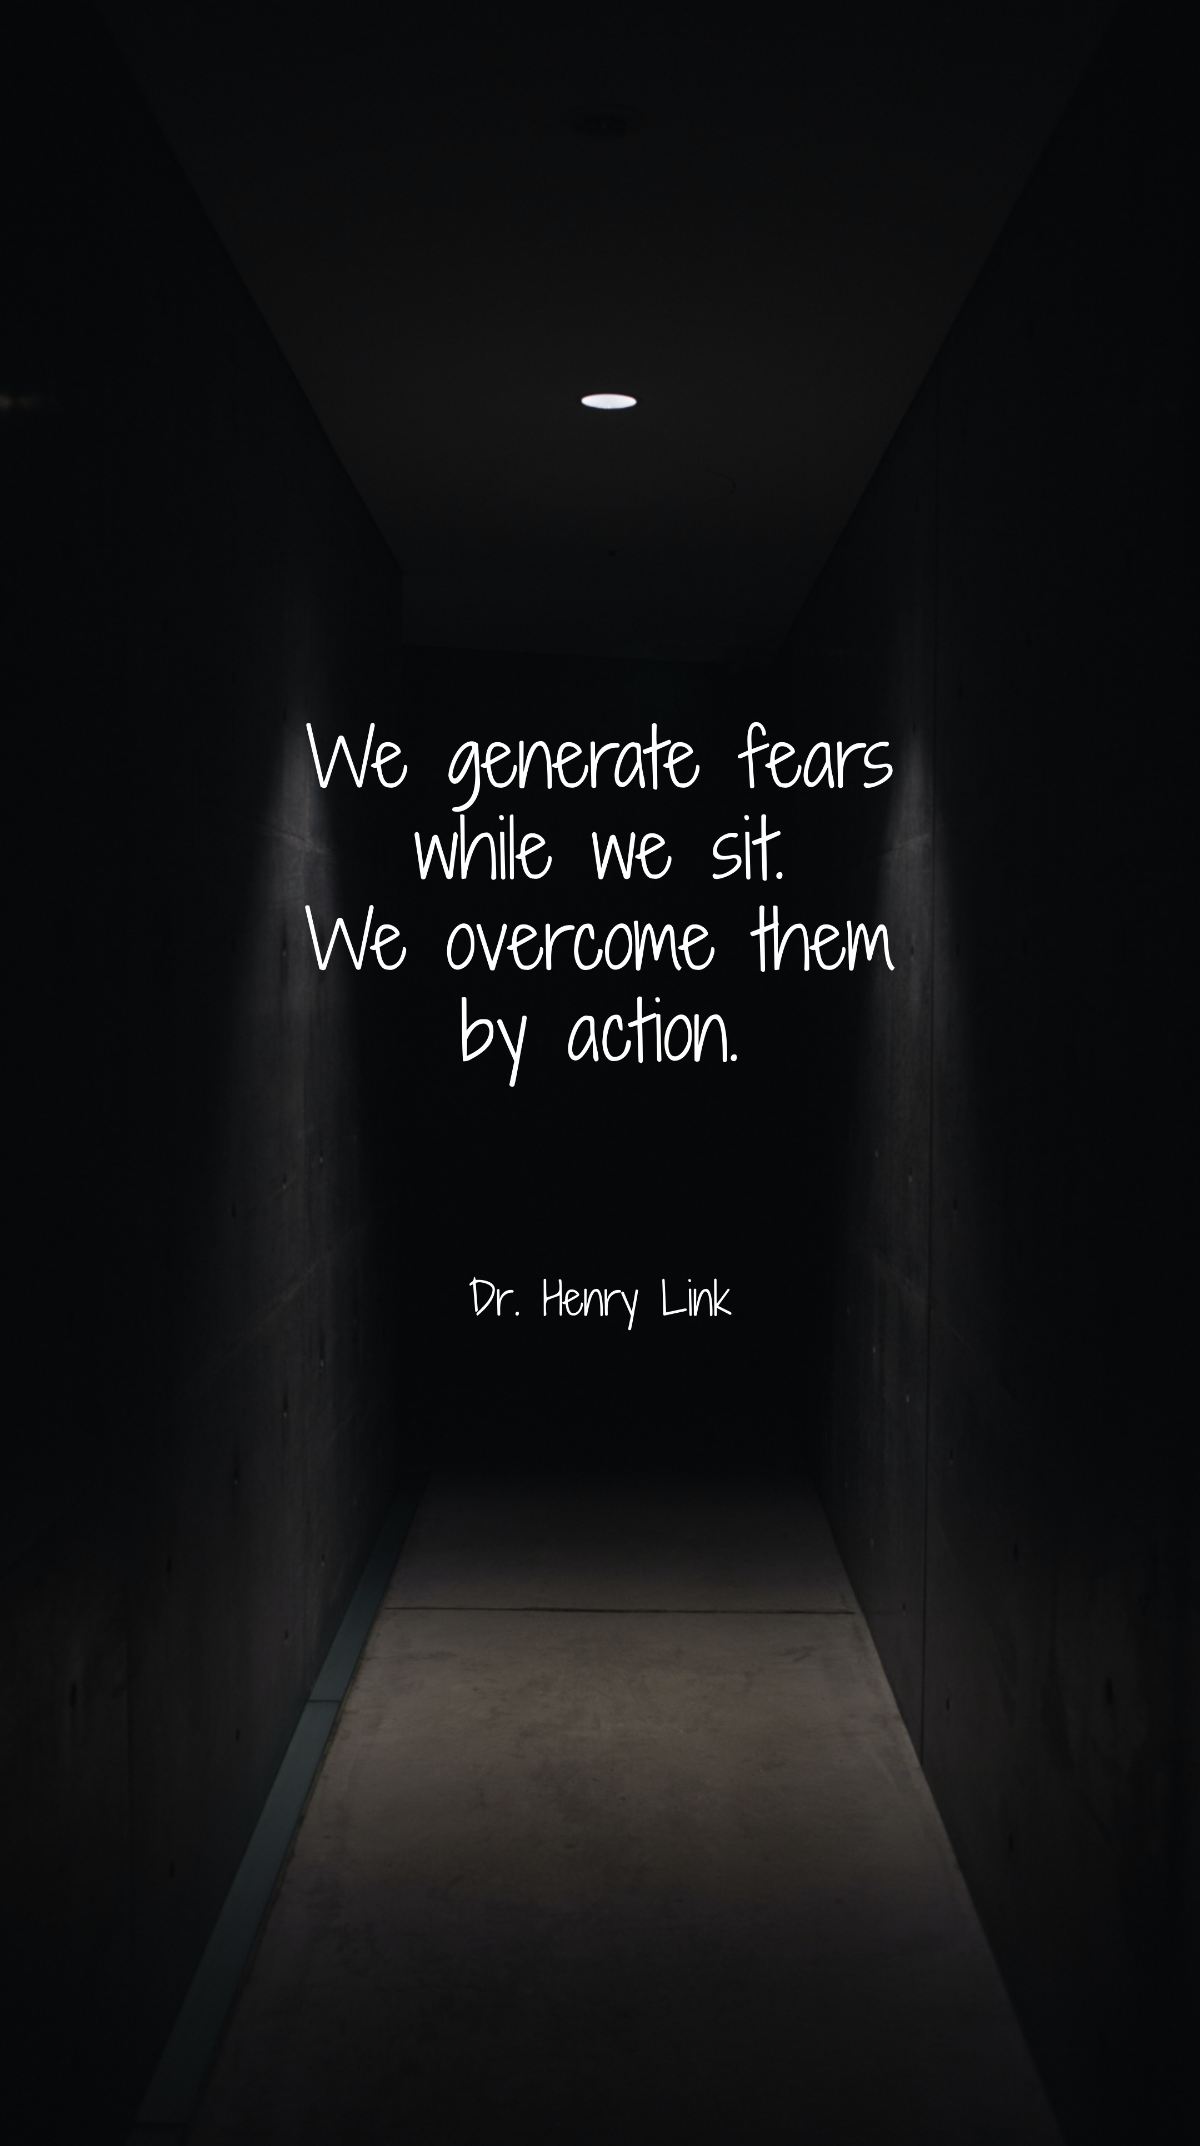 Dr. Henry Link - We generate fears while we sit. We overcome them by action Template